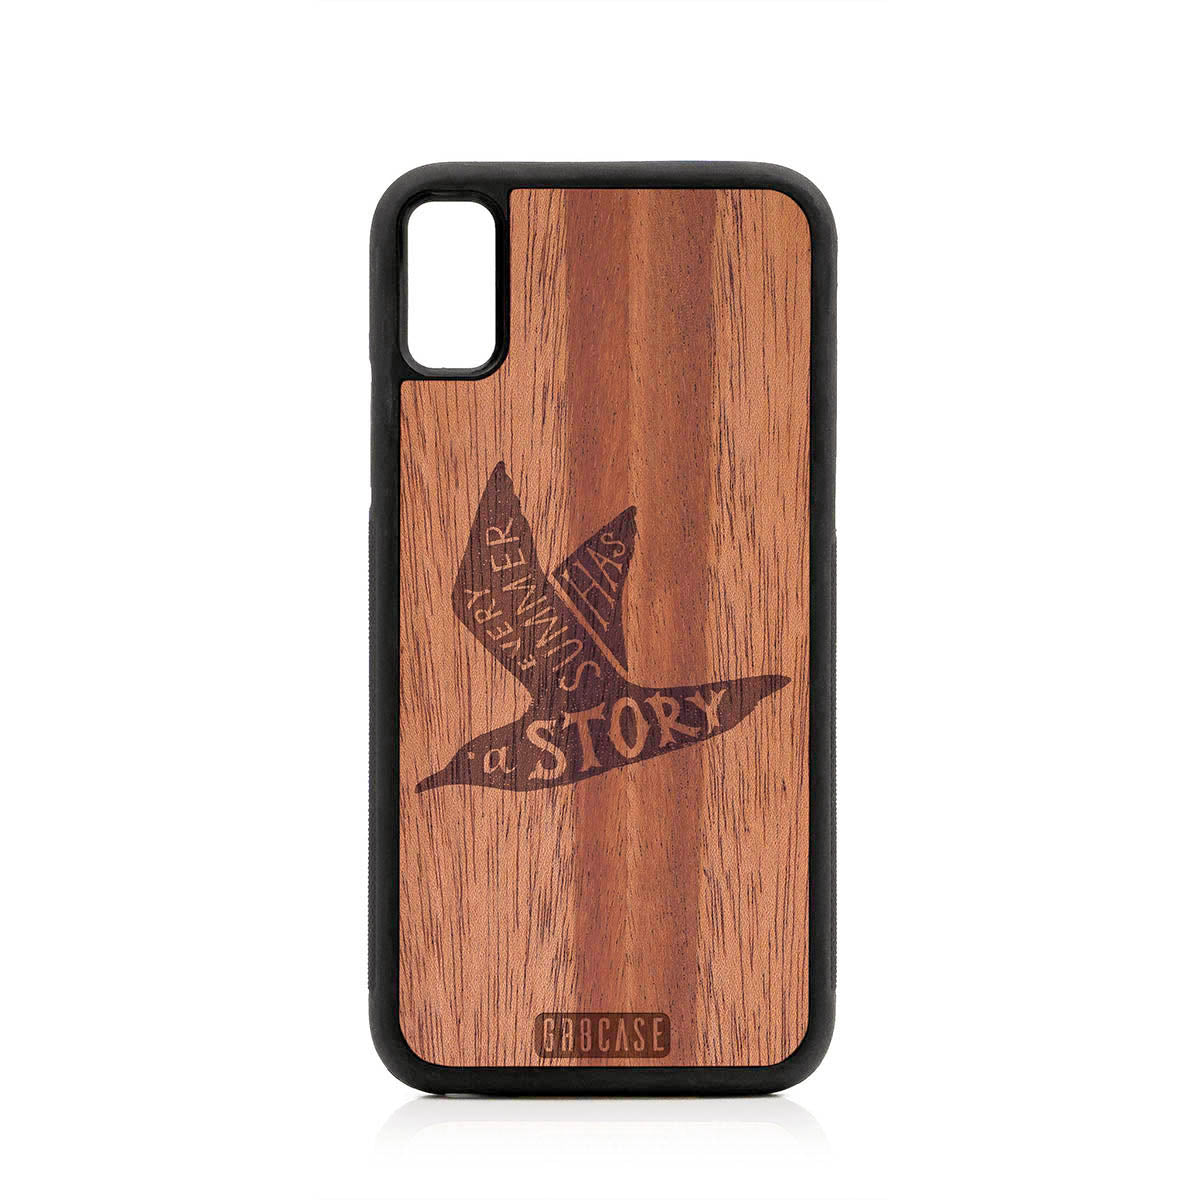 Every Summer Has A Story (Seagull) Design Wood Case For iPhone XR